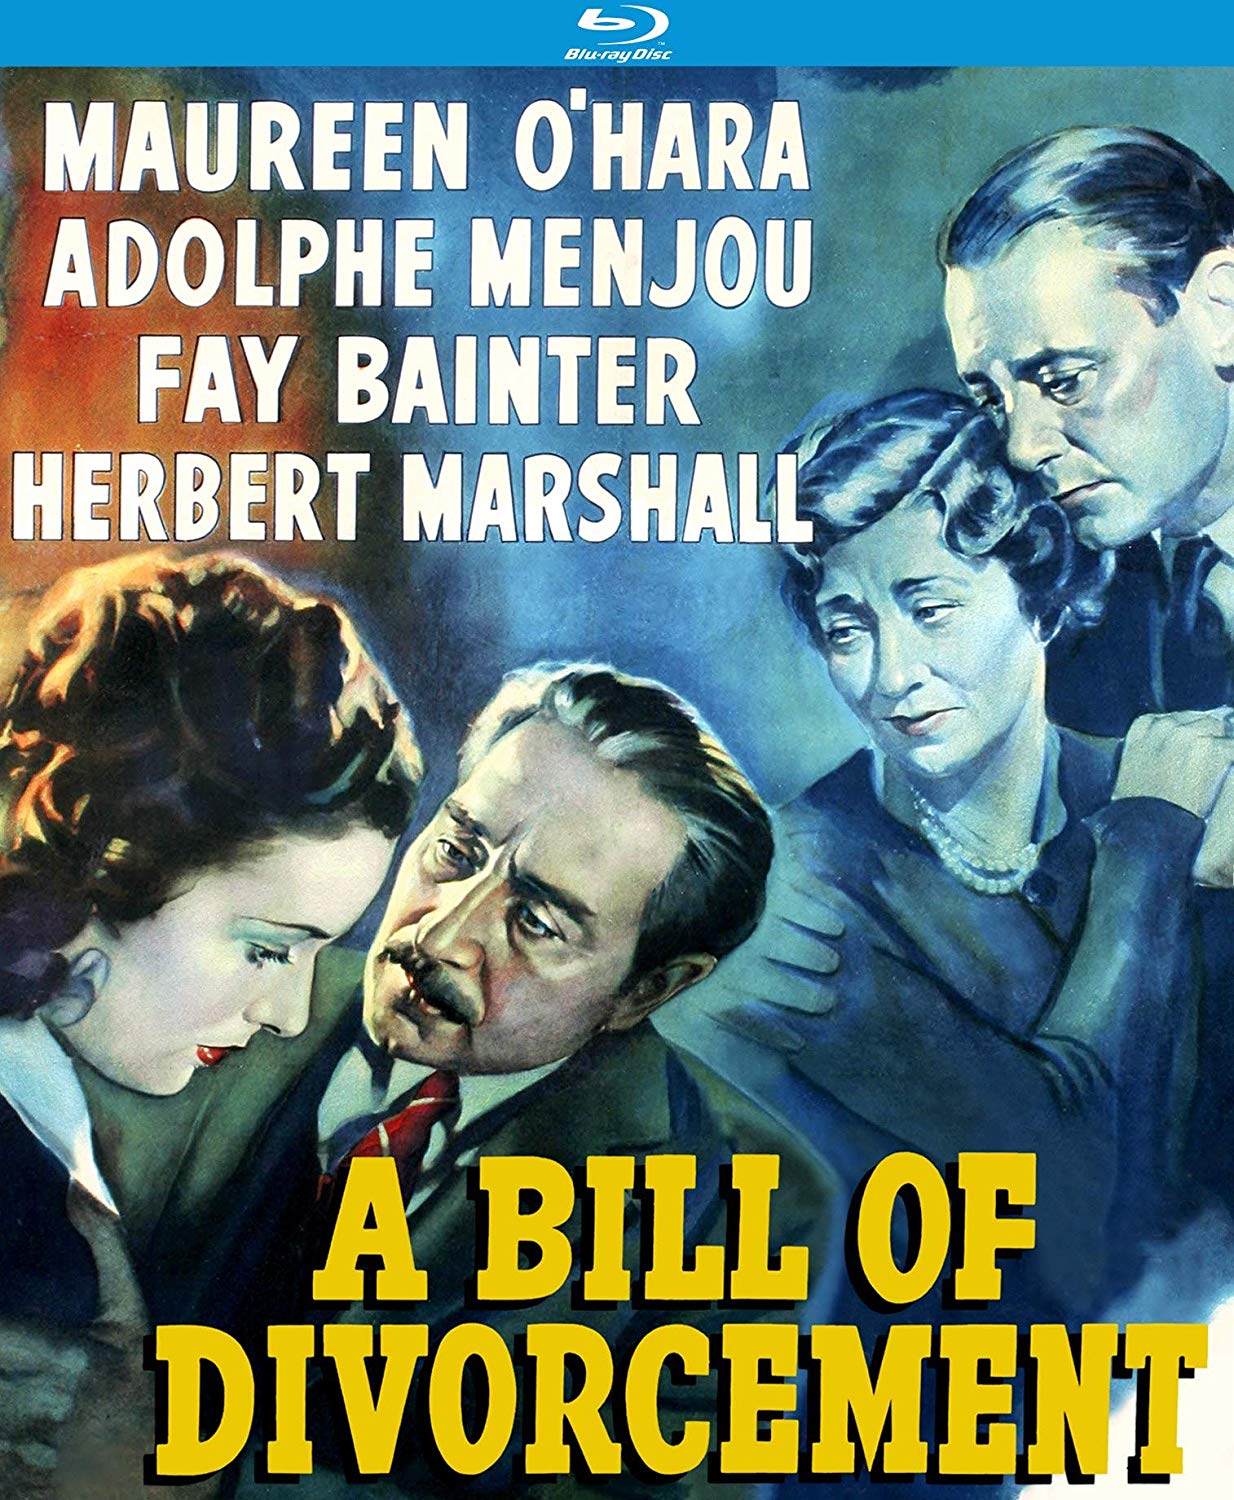 A Bill of Divorcement Blu-ray - Buy at Amazon